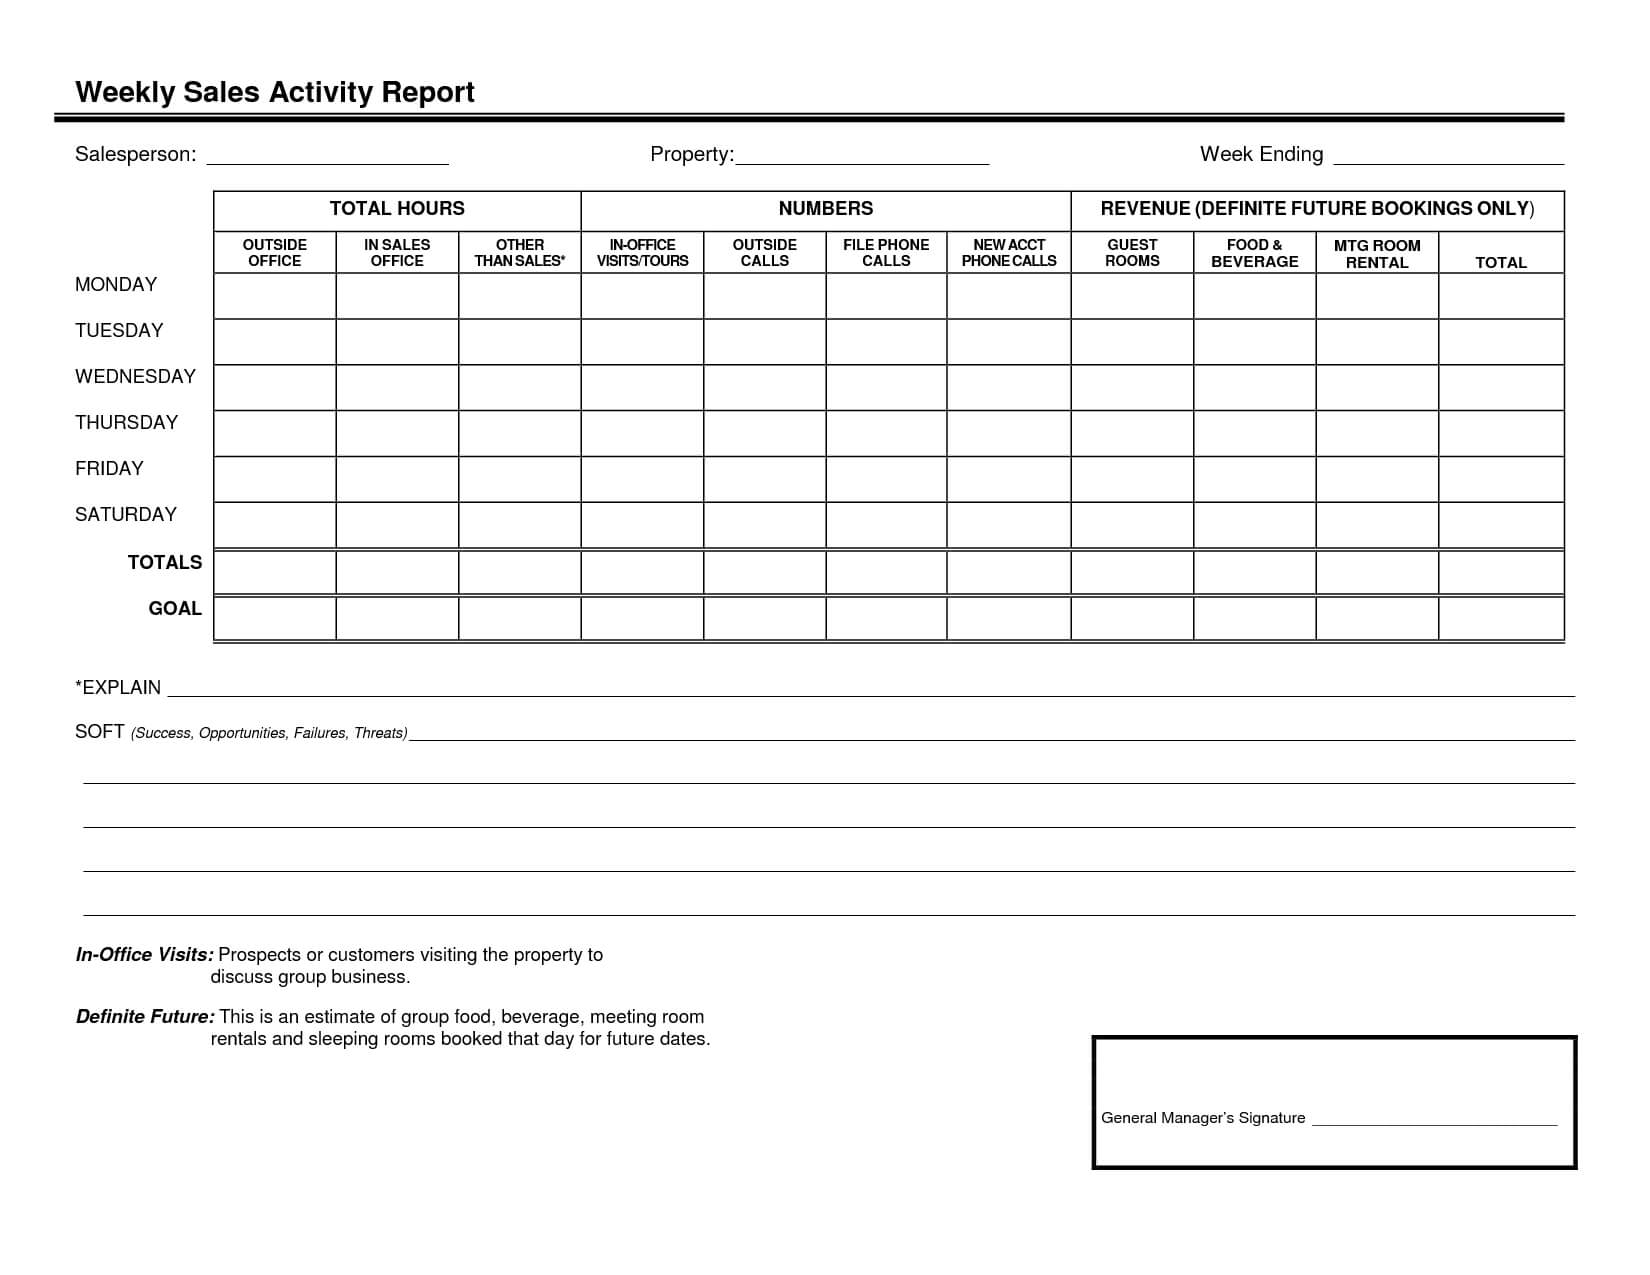 012 Sales Call Reporting Template Weekly Activity Report Pertaining To Sales Call Report Template Free